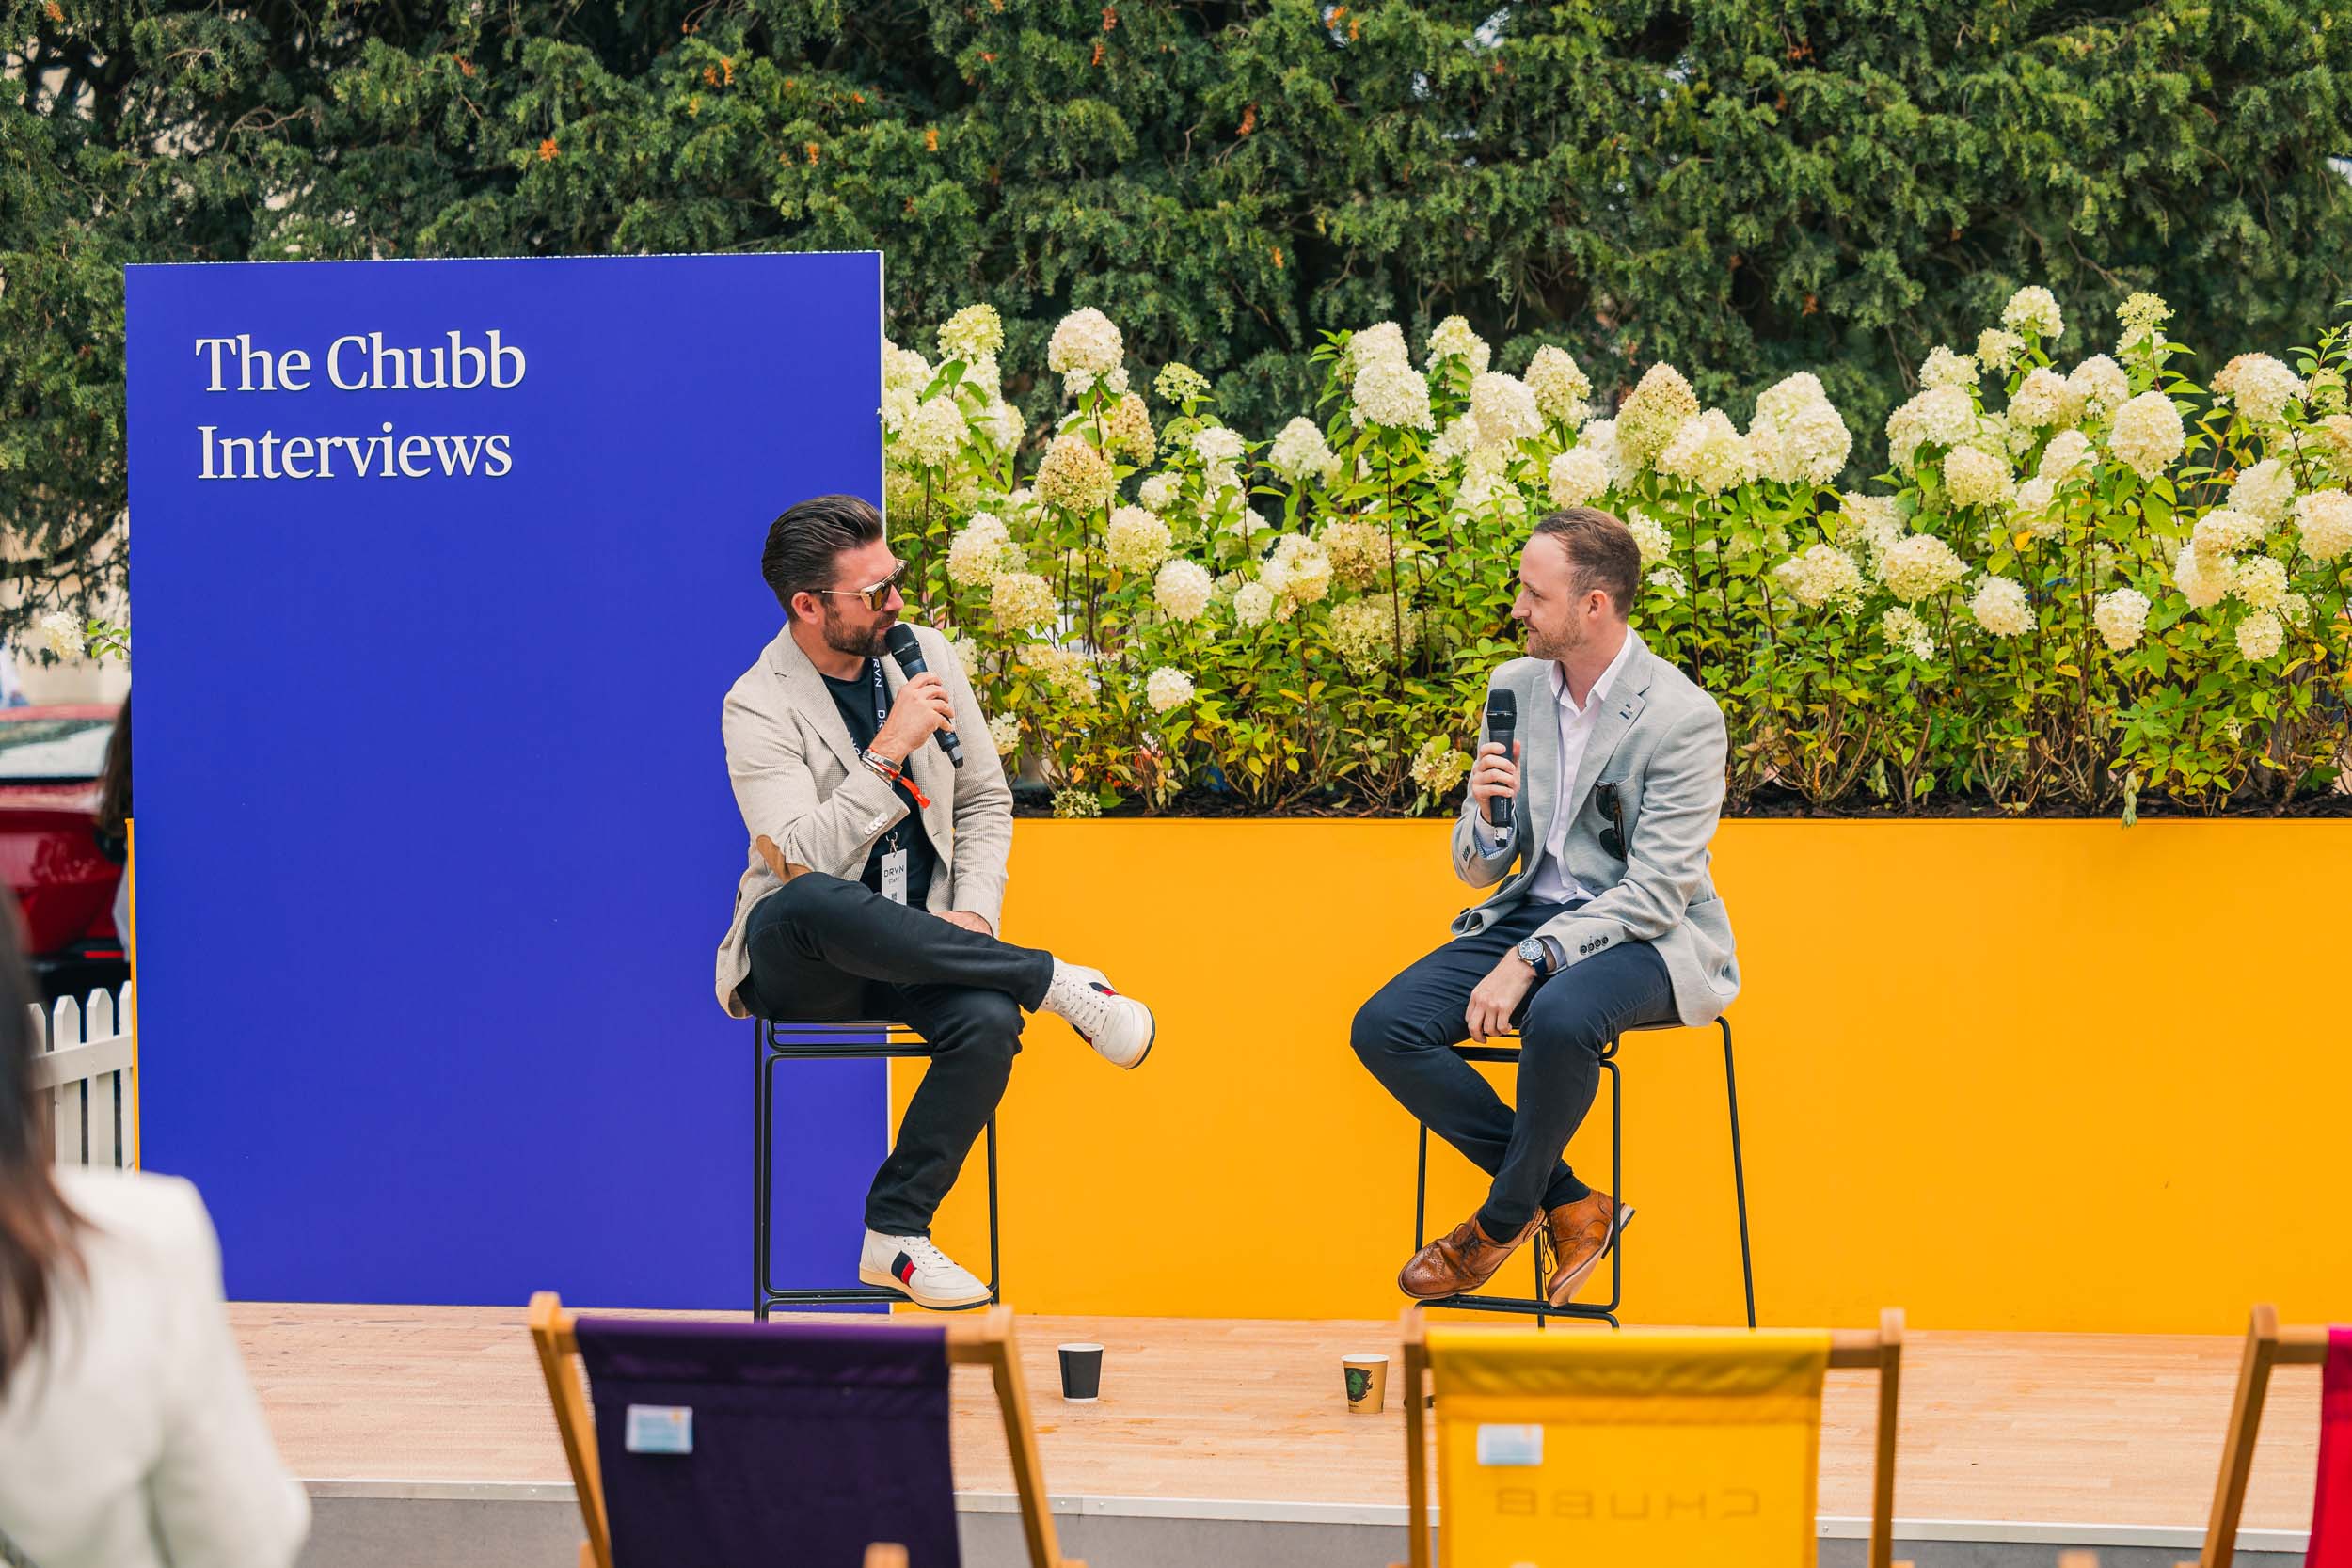 The Chubb Interviews at Concours of Elegance